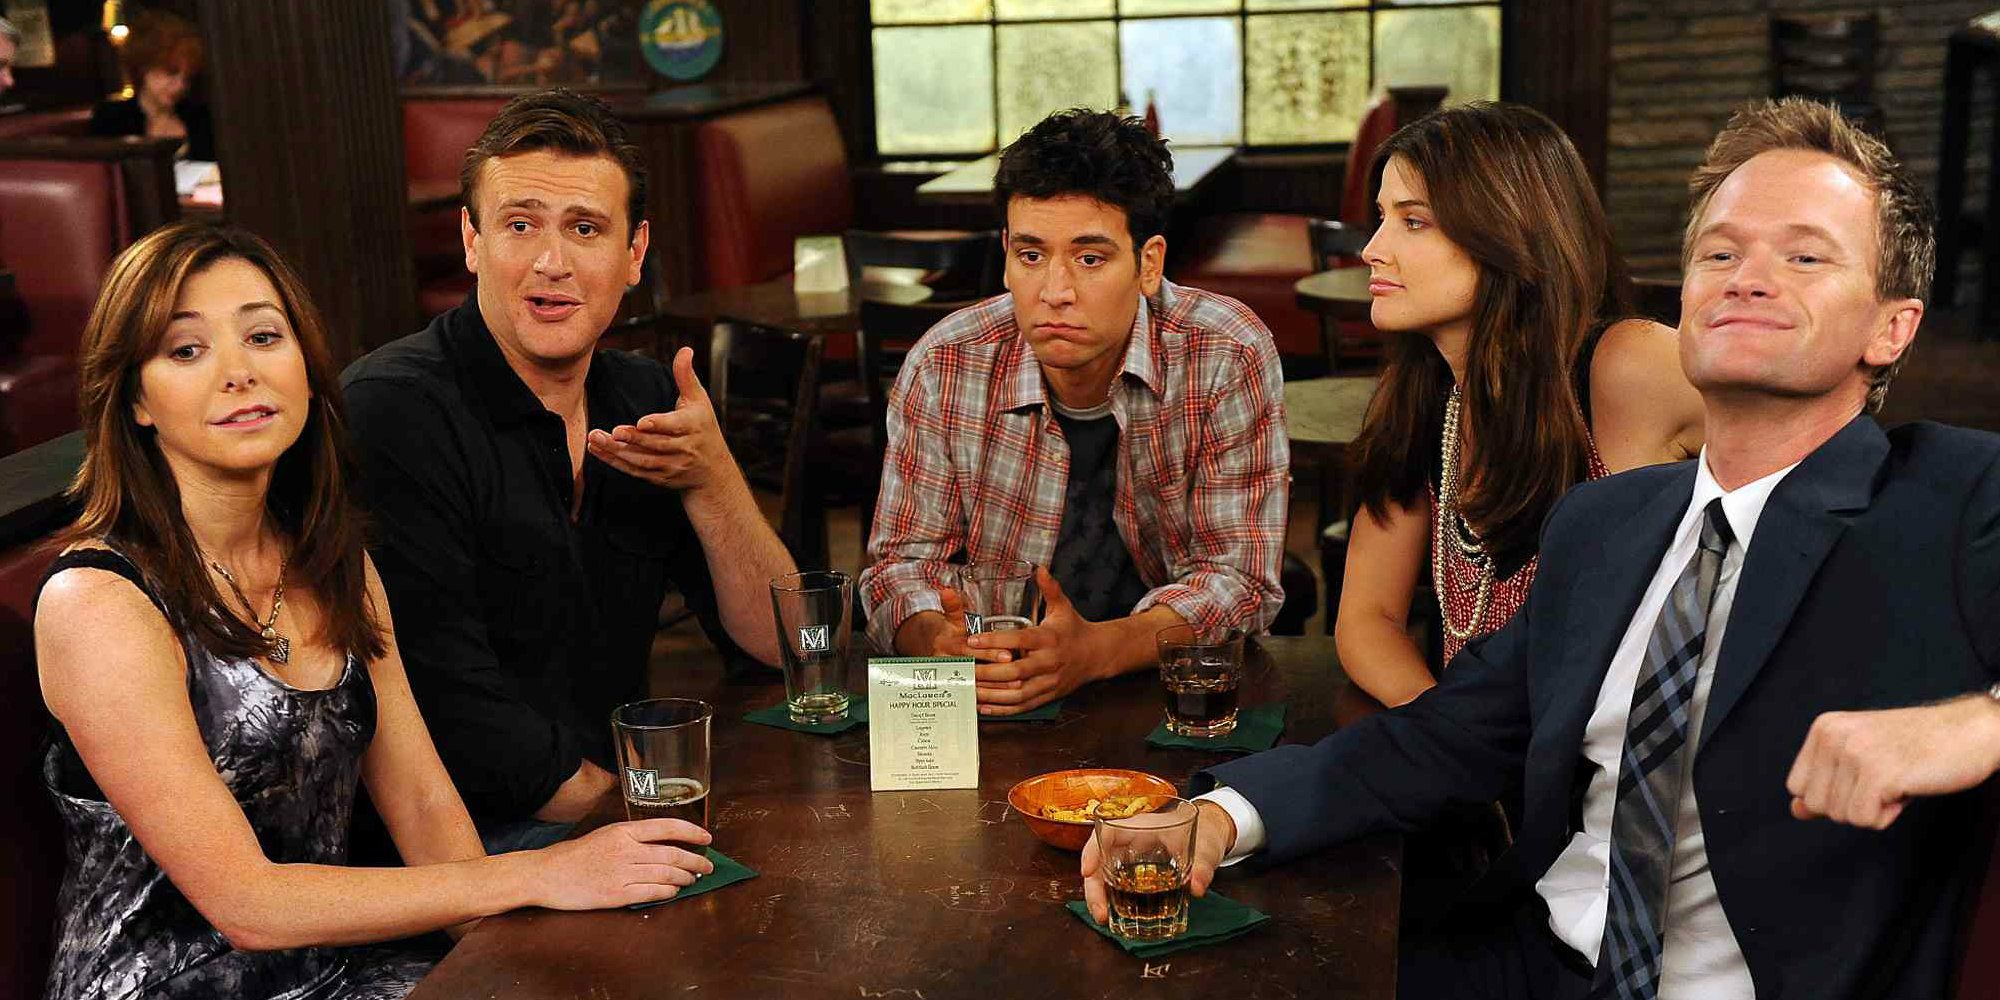 The friends from How I Met Your Mother sitting in McLaren's, all looking at something.